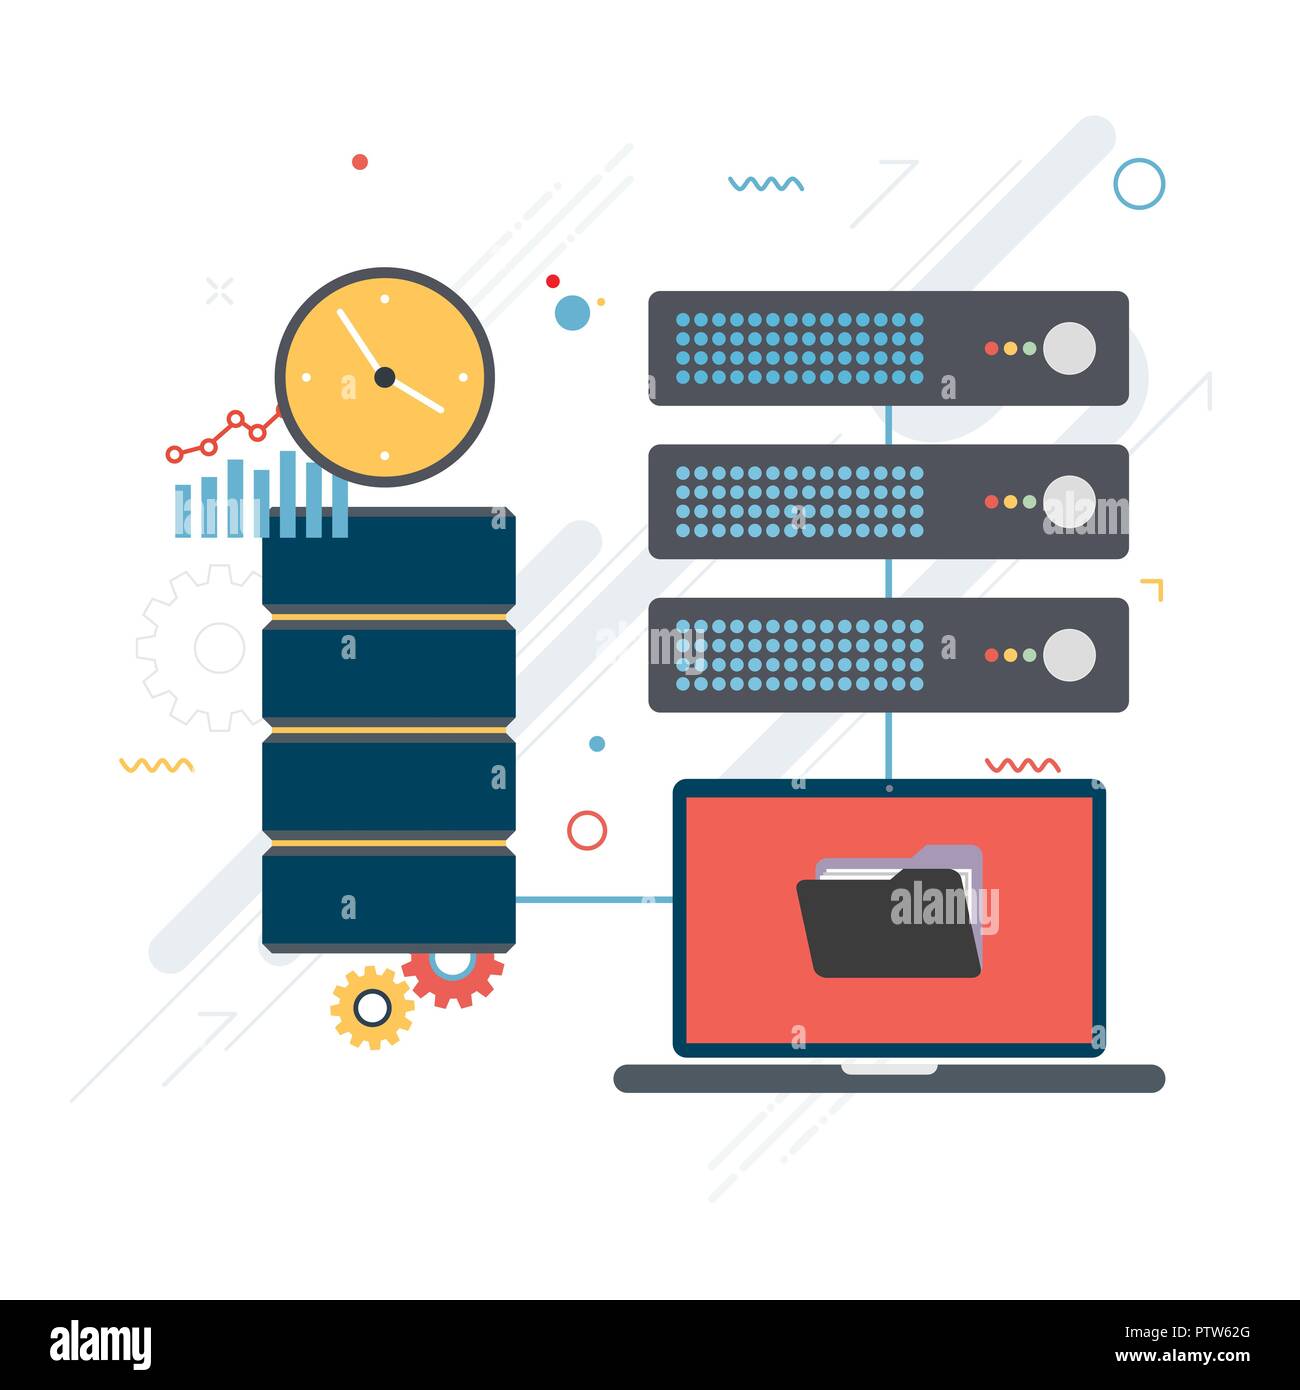 Flat design concepts for shared data, documents, videos and photos.Internet computer users download files safely. Vector design shape blue background. Stock Vector